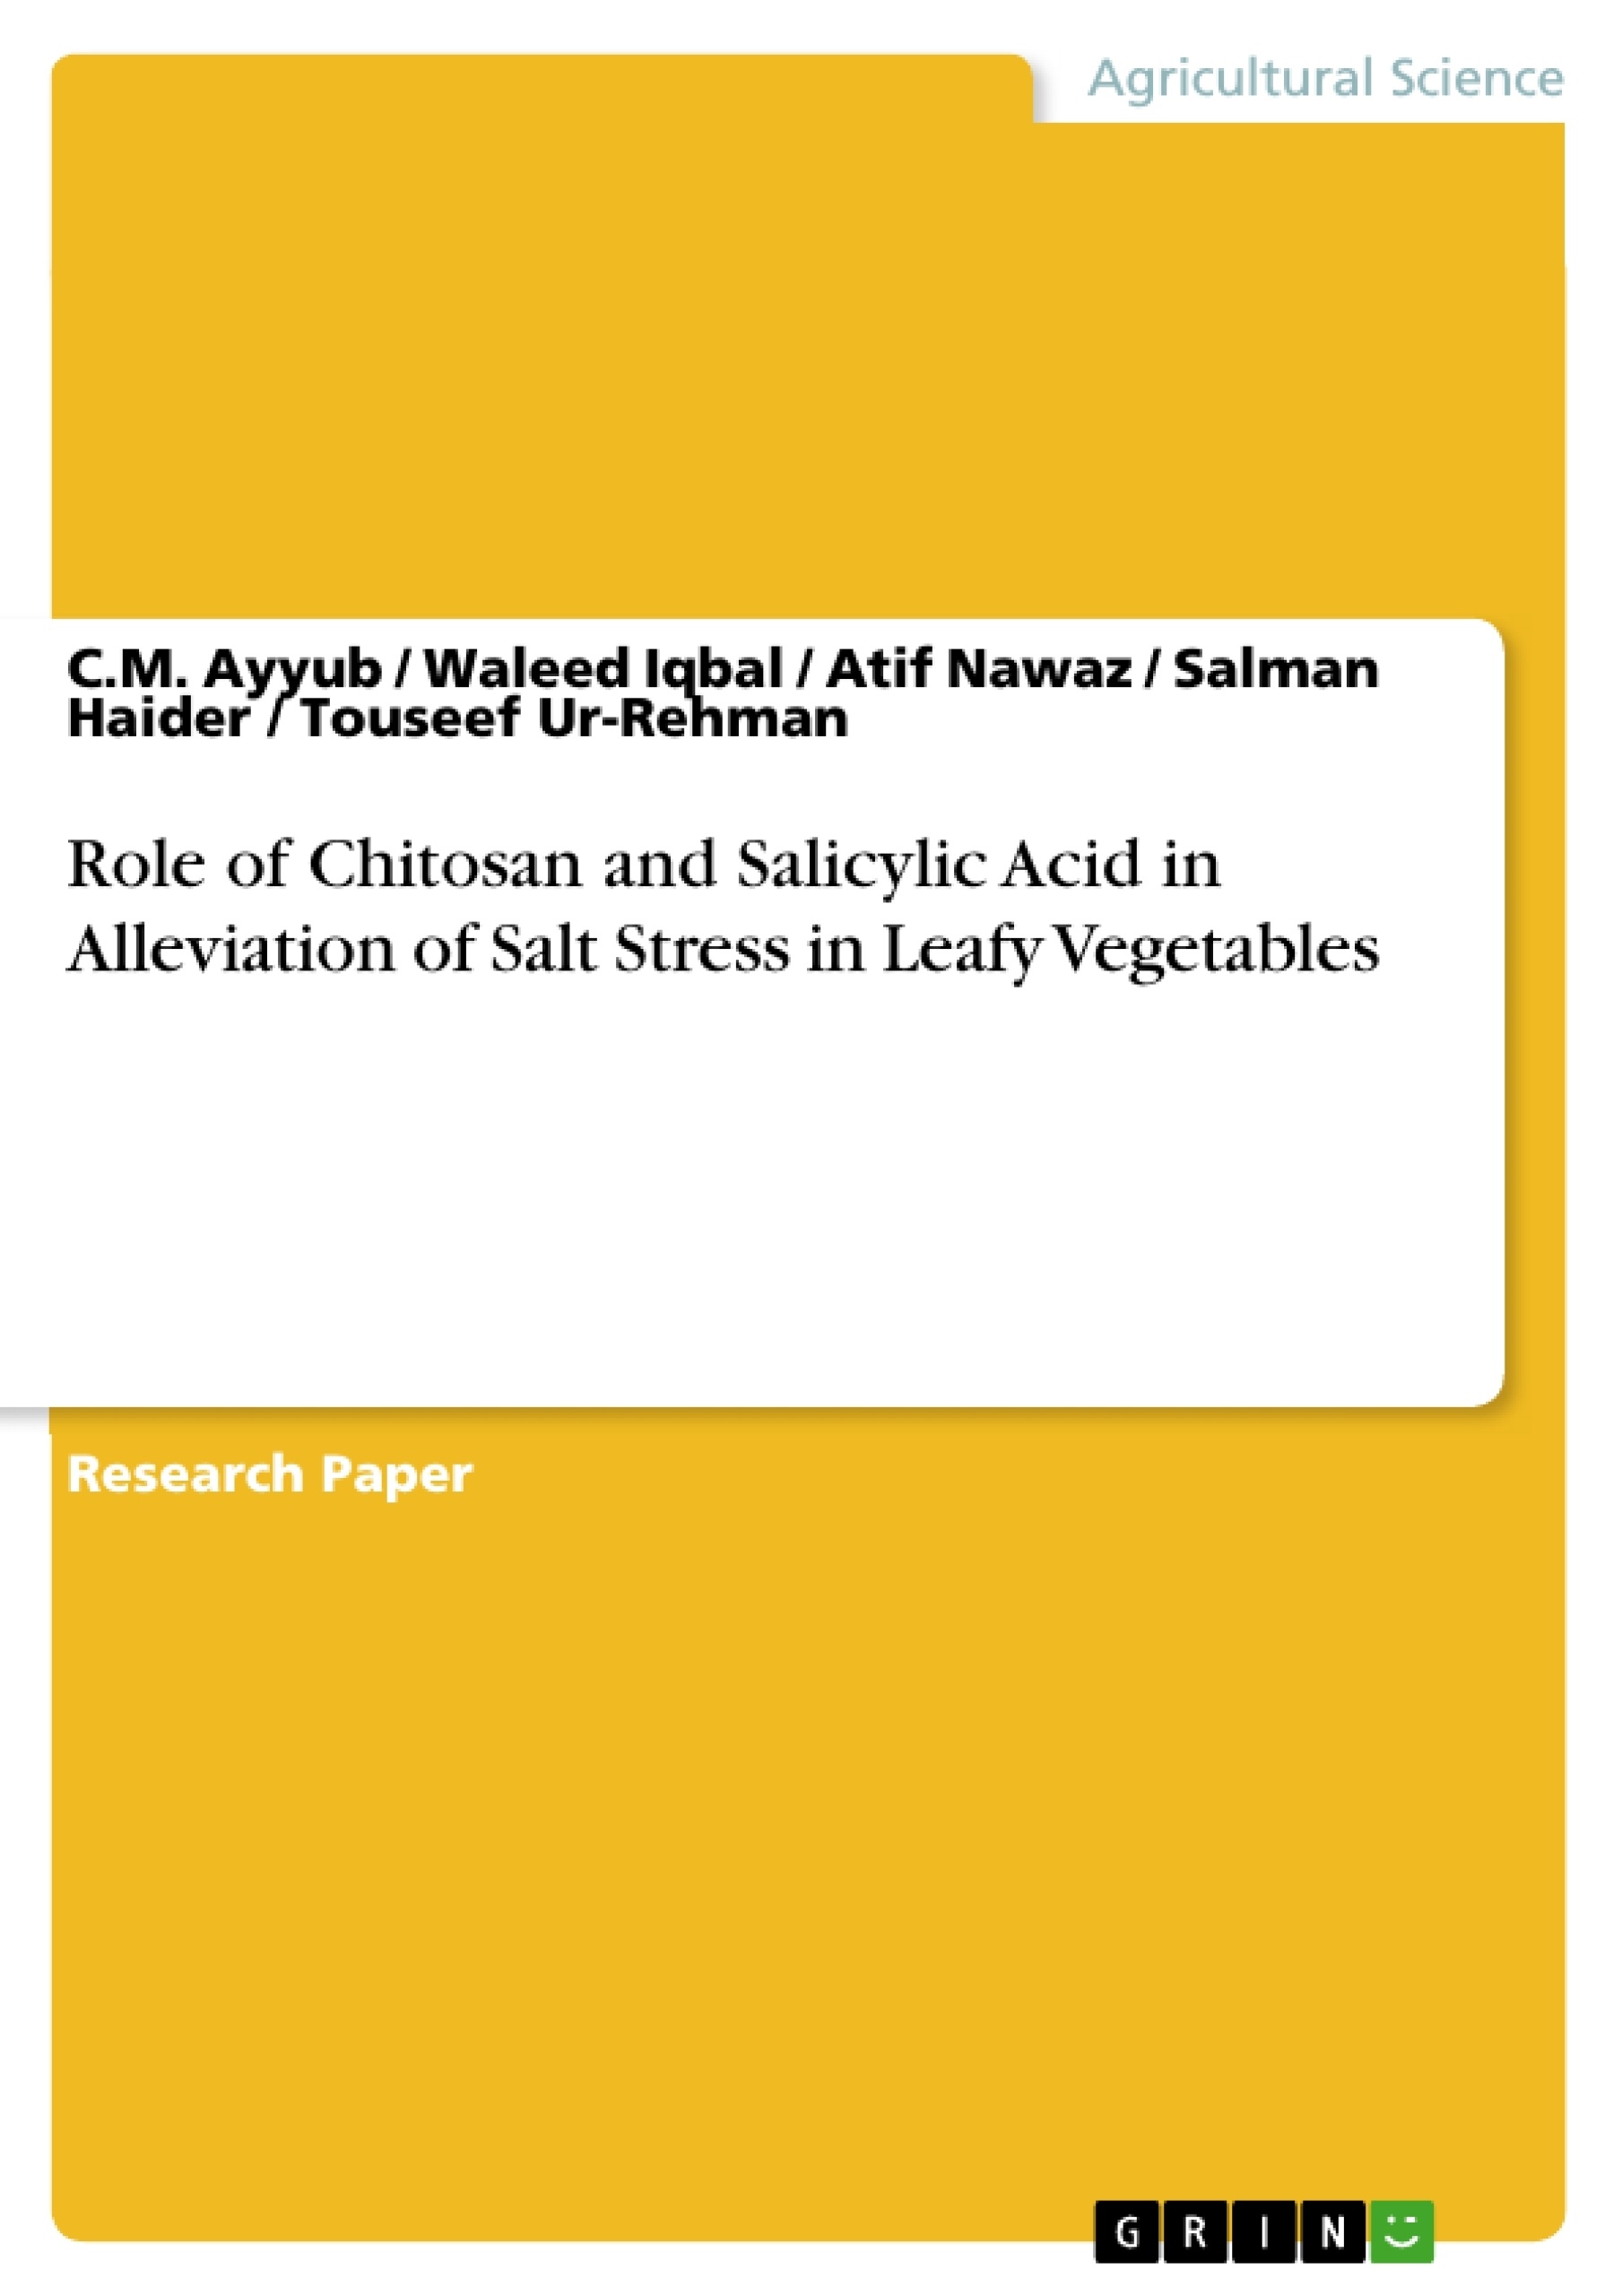 Titel: Role of Chitosan and Salicylic Acid in Alleviation of Salt Stress in Leafy Vegetables